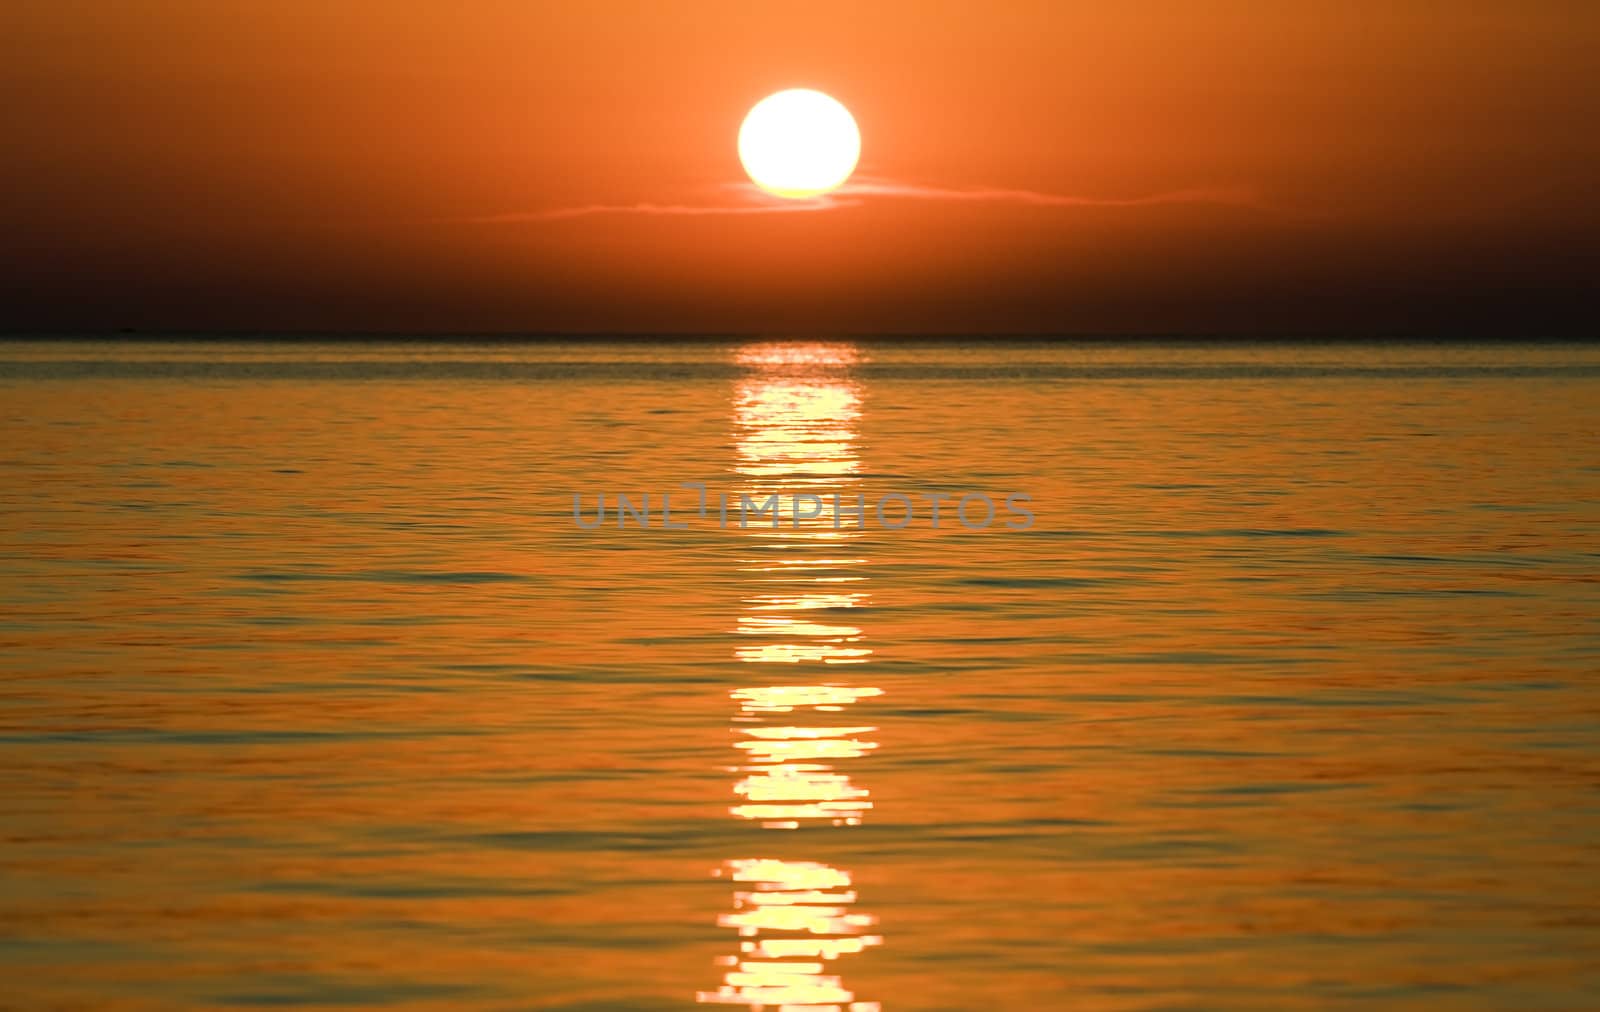 Sunset over the Adriatic sea by fljac